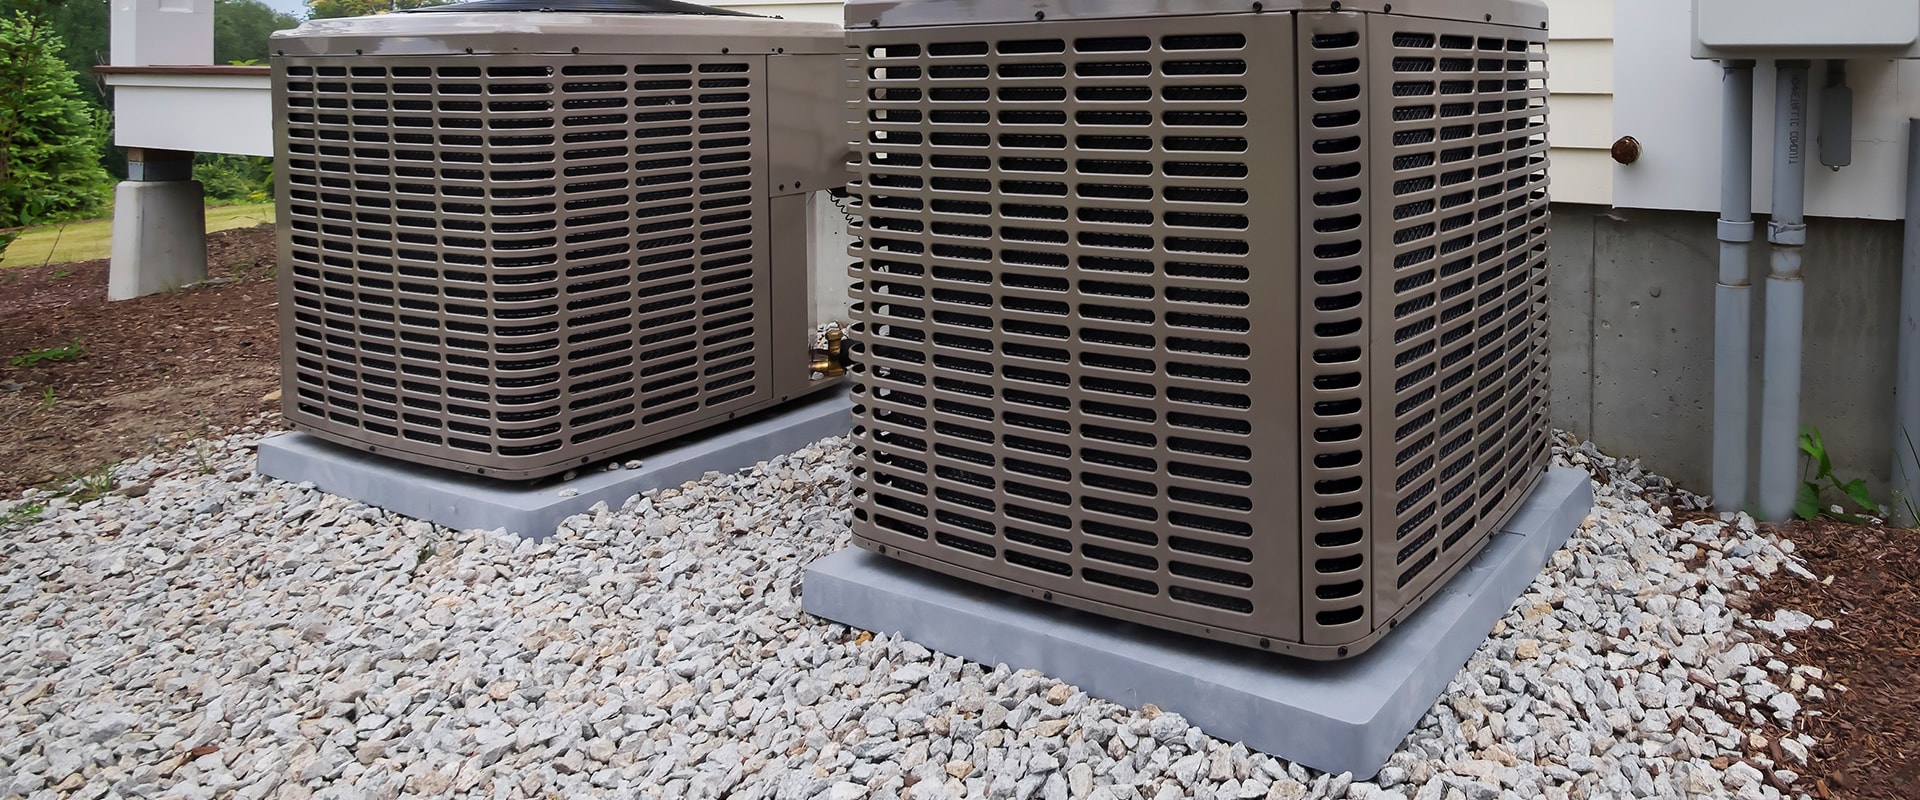 What Type of HVAC System Should I Replace My Current System With in West Palm Beach, FL?